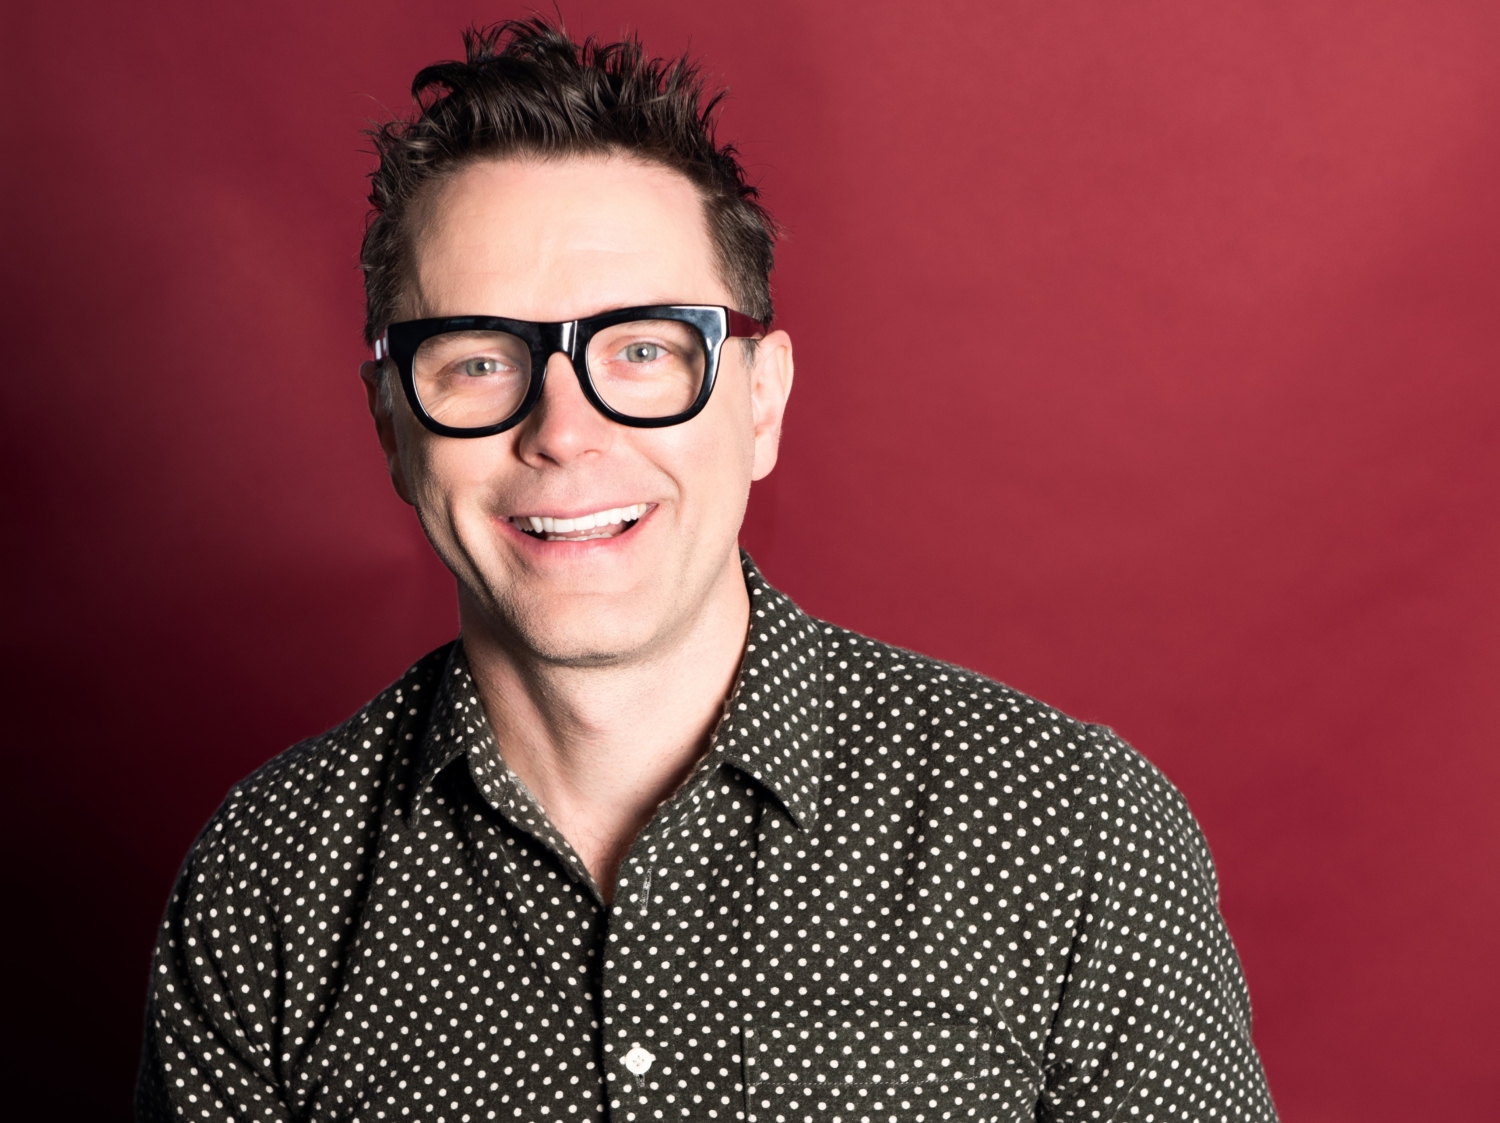 Bobby Bones Joins Music City Baseball Initiative The Sports Credential